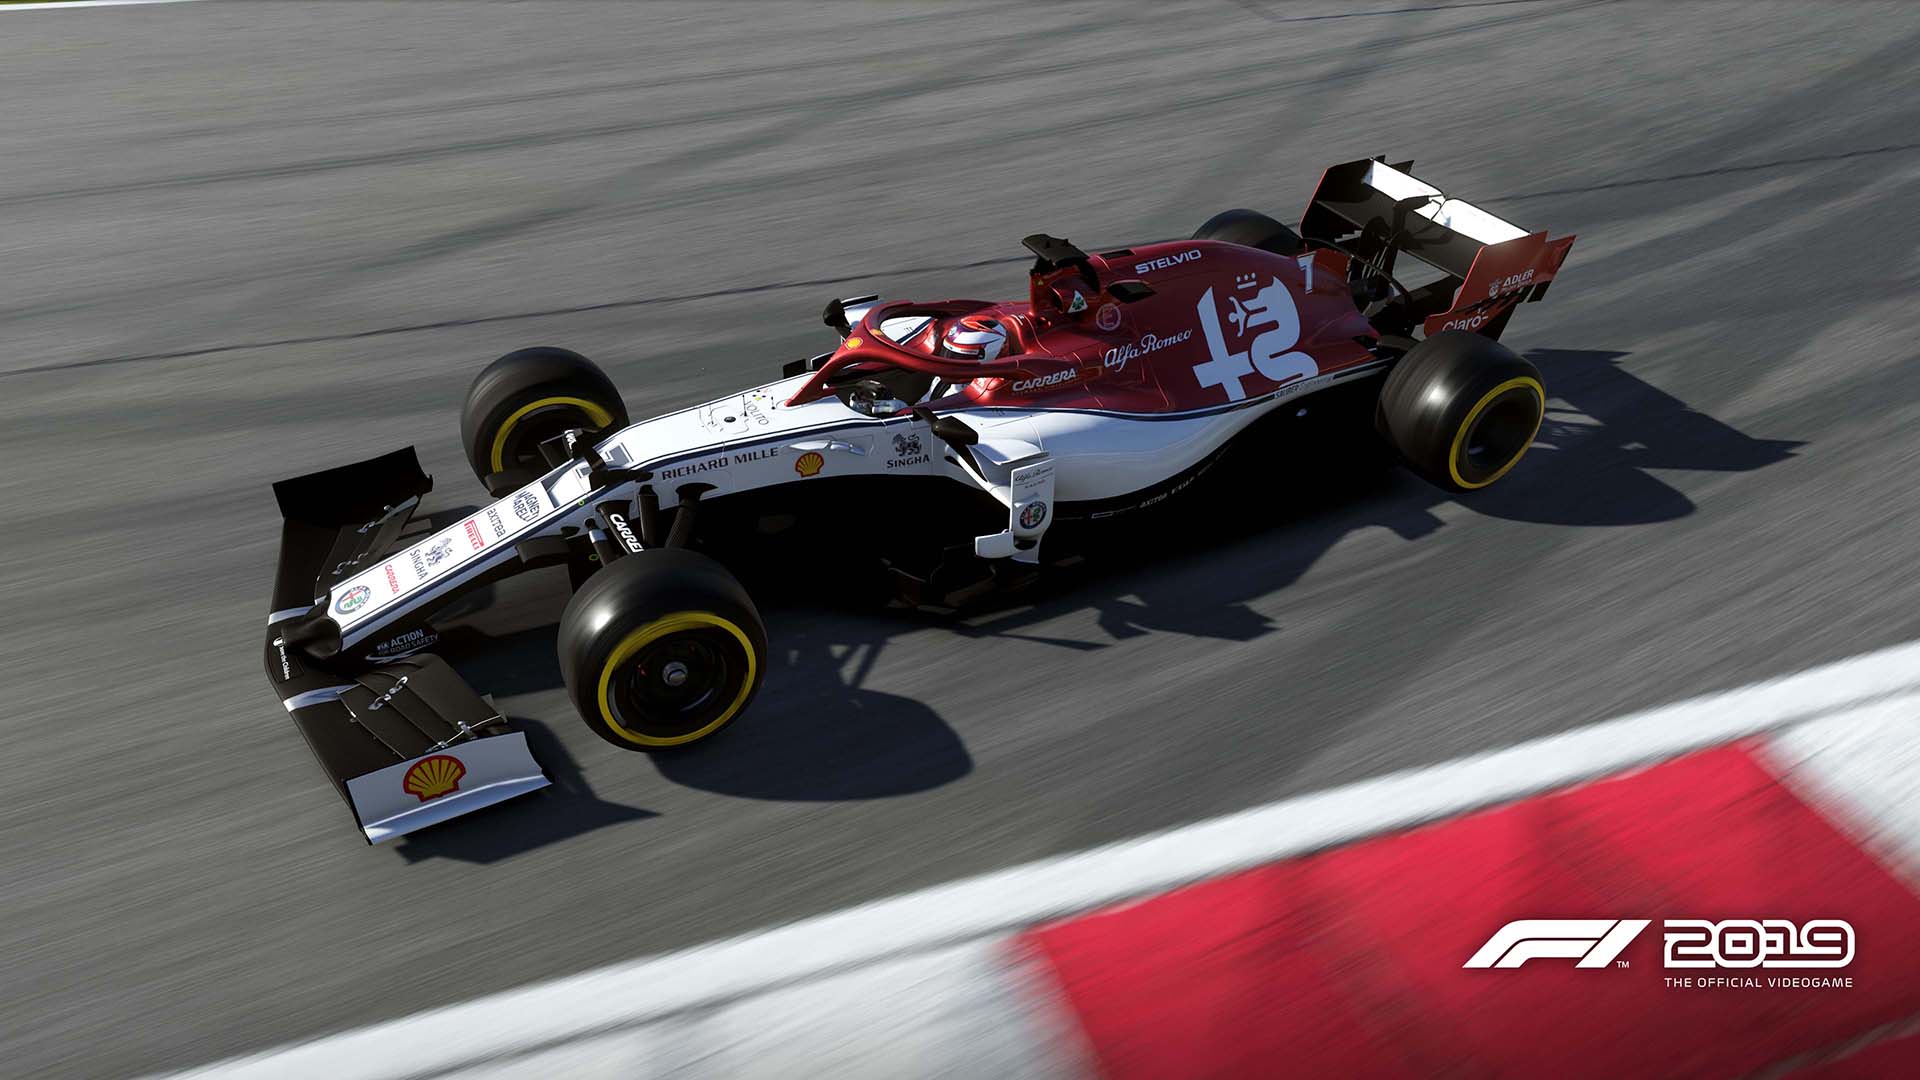 EA SPORTS F1® 22 on Twitter: "Patch 1.04 is now live on PS4! You can check  out the notes right here ⬇️ https://t.co/5DbsVpg7sV  https://t.co/TnBx9x1rLO" / Twitter